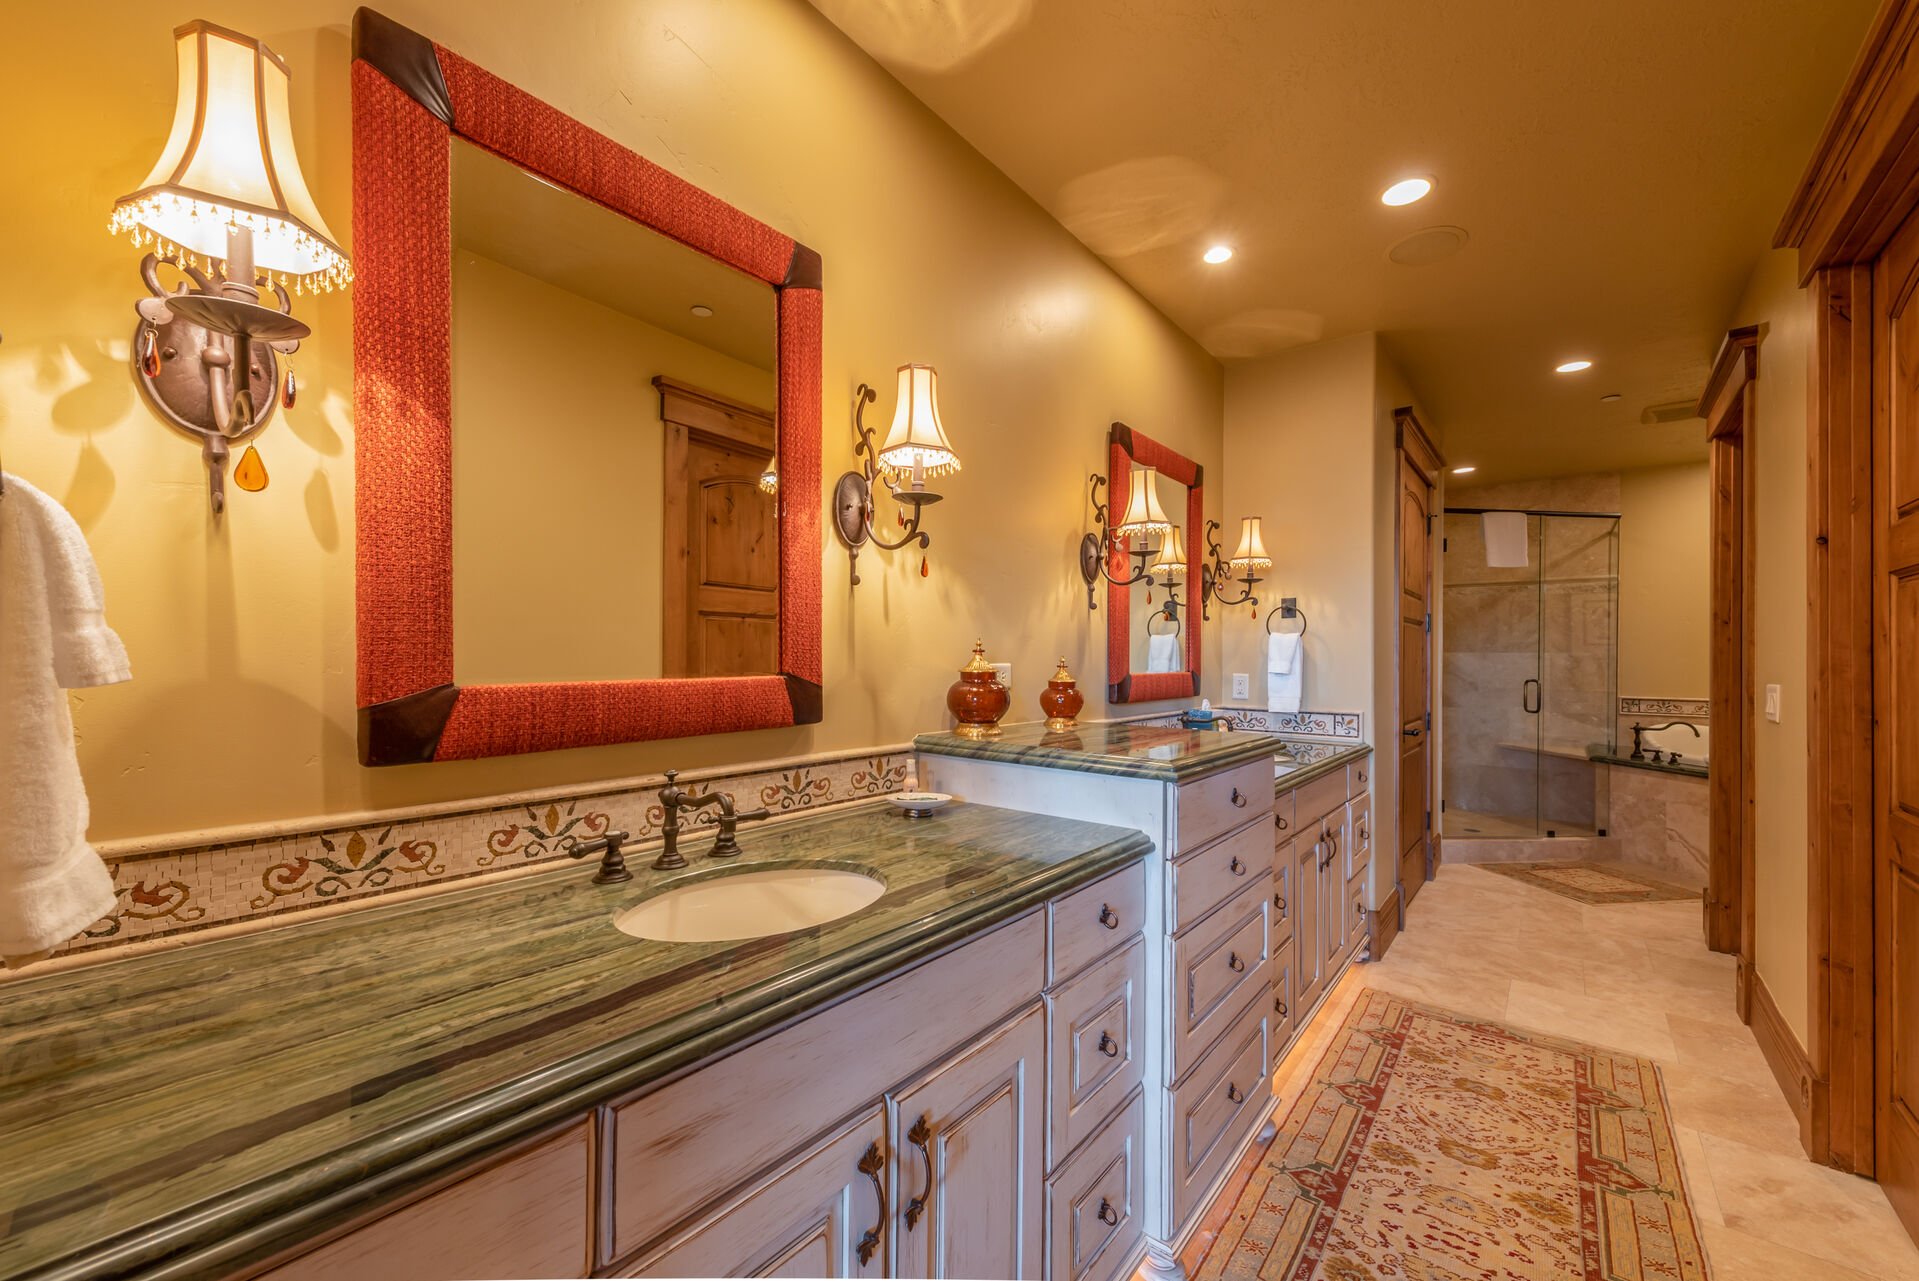 Grand Master Bath with Dual Vanities, Jetted Tub, a Dual Head Shower, Walk-in Closet and Water Closet